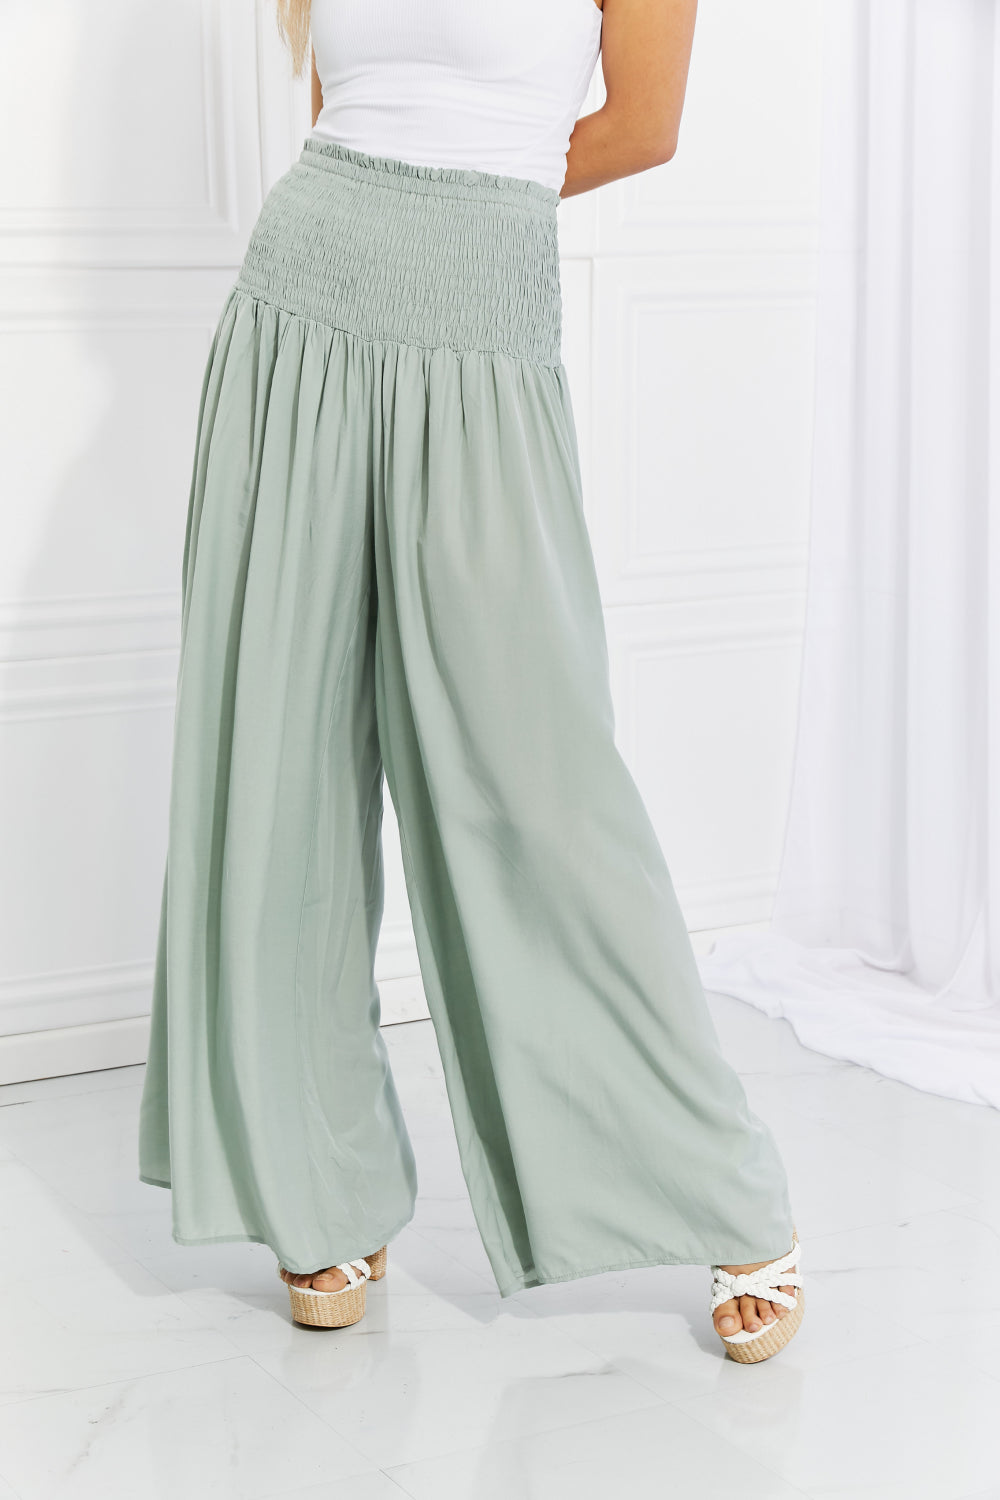 SAGE - HEYSON Full Size Beautiful You Smocked Palazzo Pants - Ships from The US - womens pants at TFC&H Co.